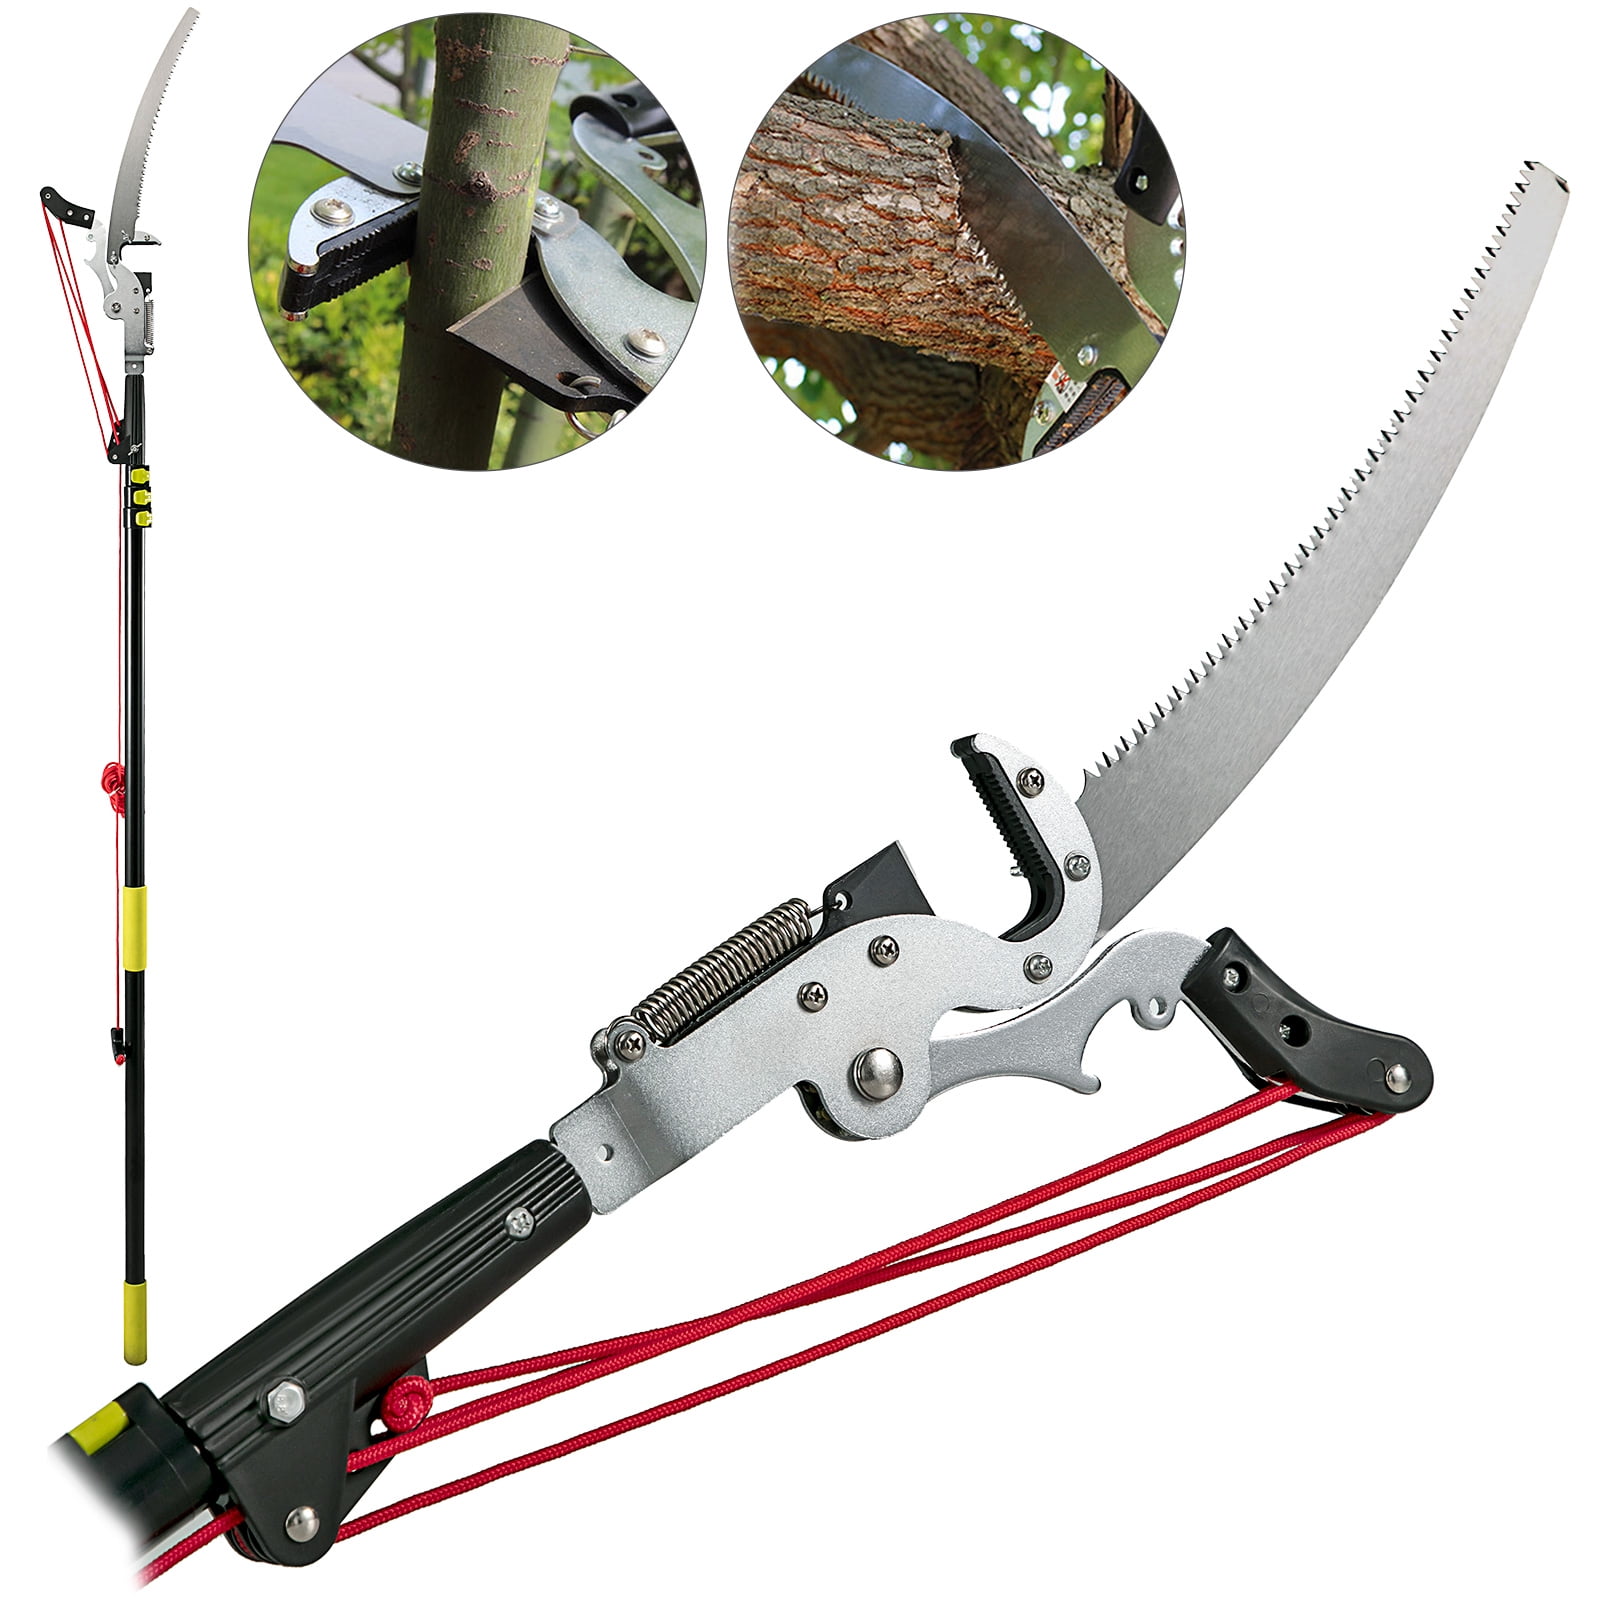 vevor-tree-pruner-5-4-17-7ft-extendable-pole-saw-with-3-sided-blade